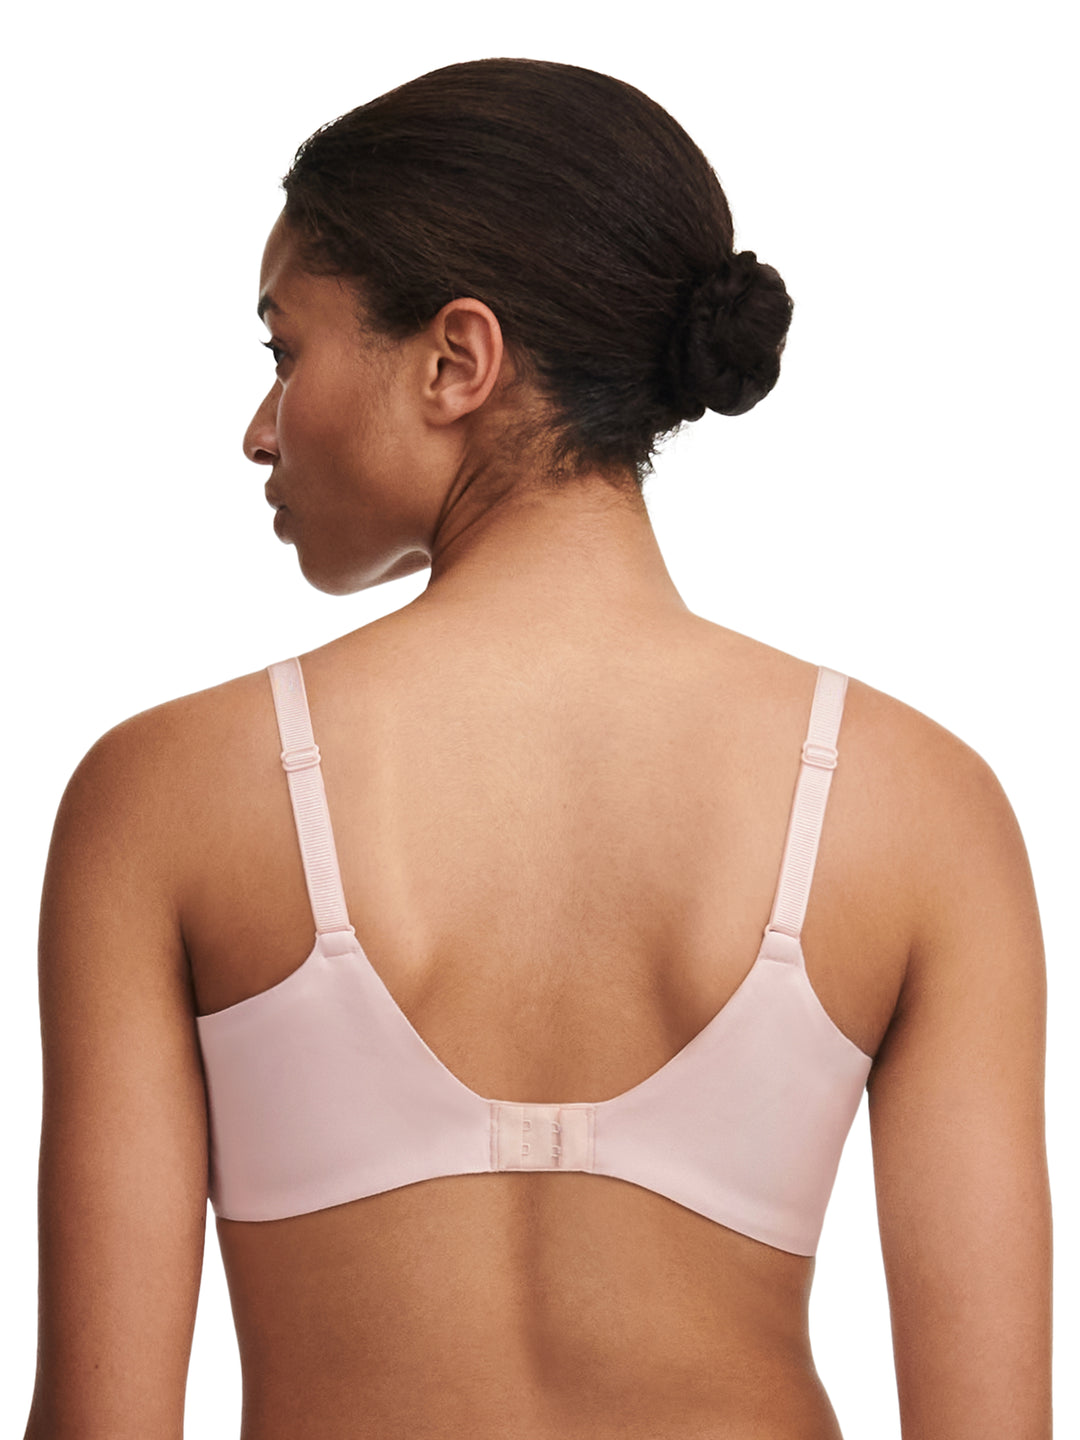 Chantelle - Graphic Support Very Covering Underwired Taffeta Pink